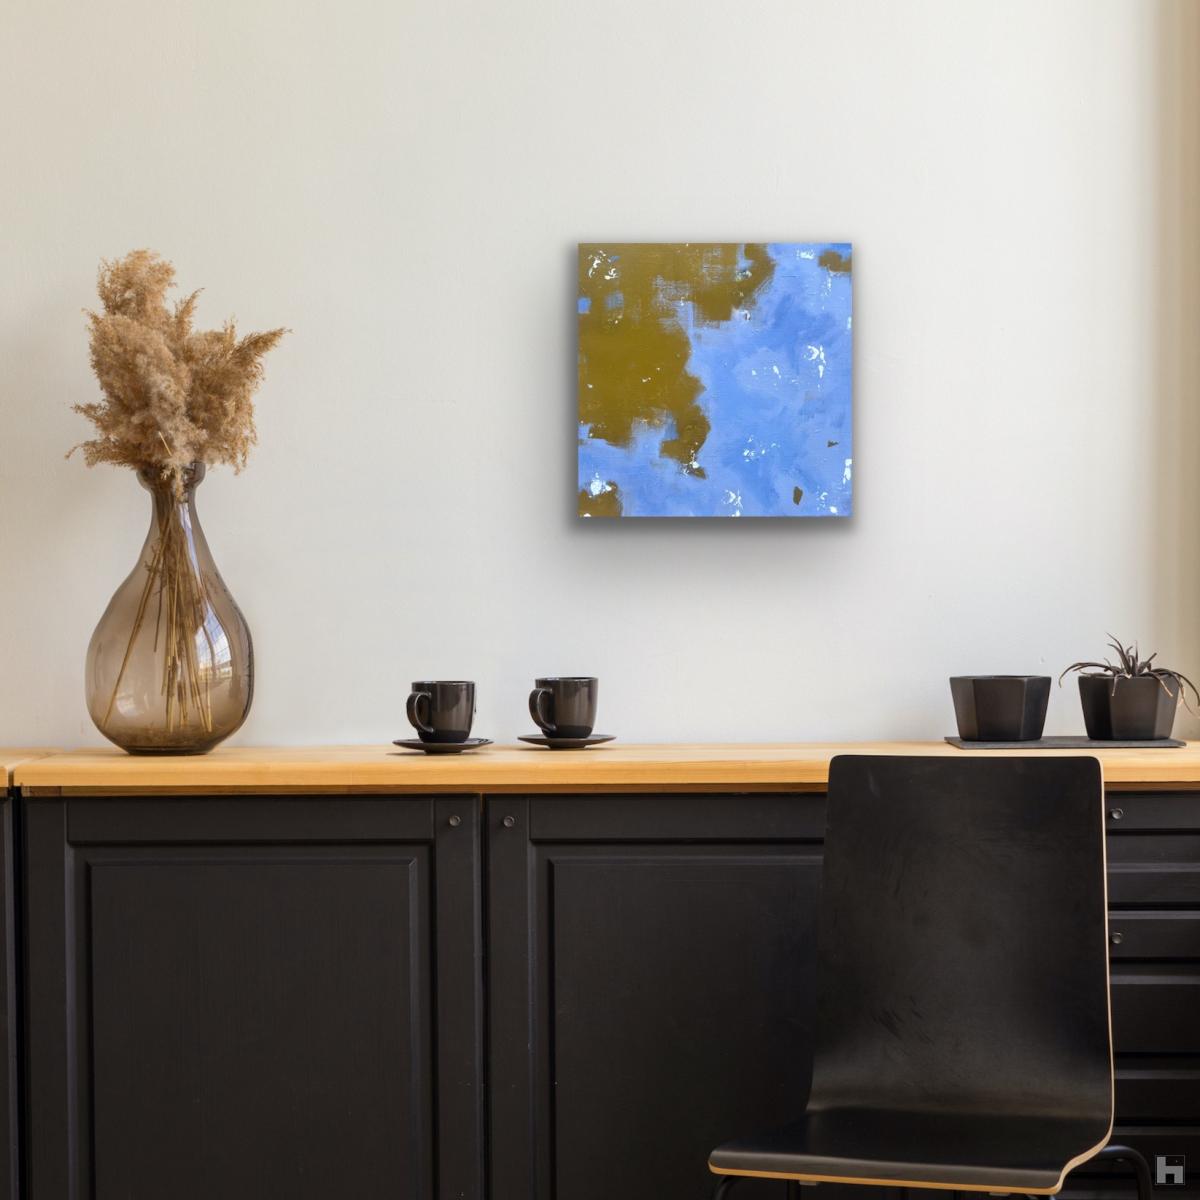 A small blue painting on the wall above a chest of drawers